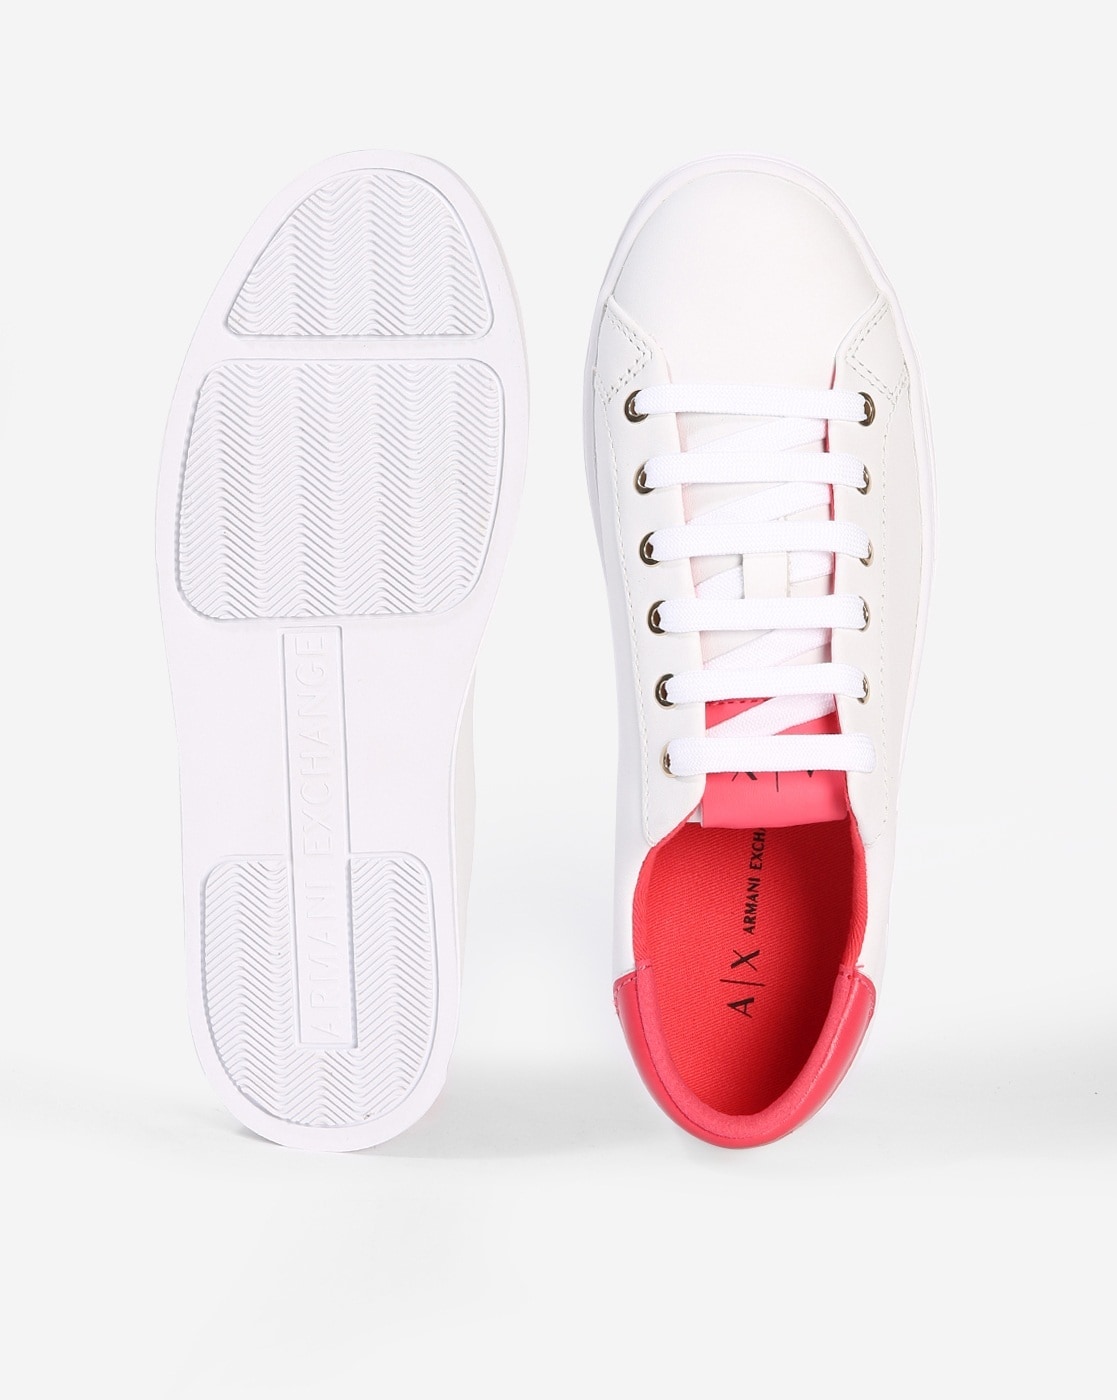 Armani Exchange AX lace-up Sneakers - Farfetch